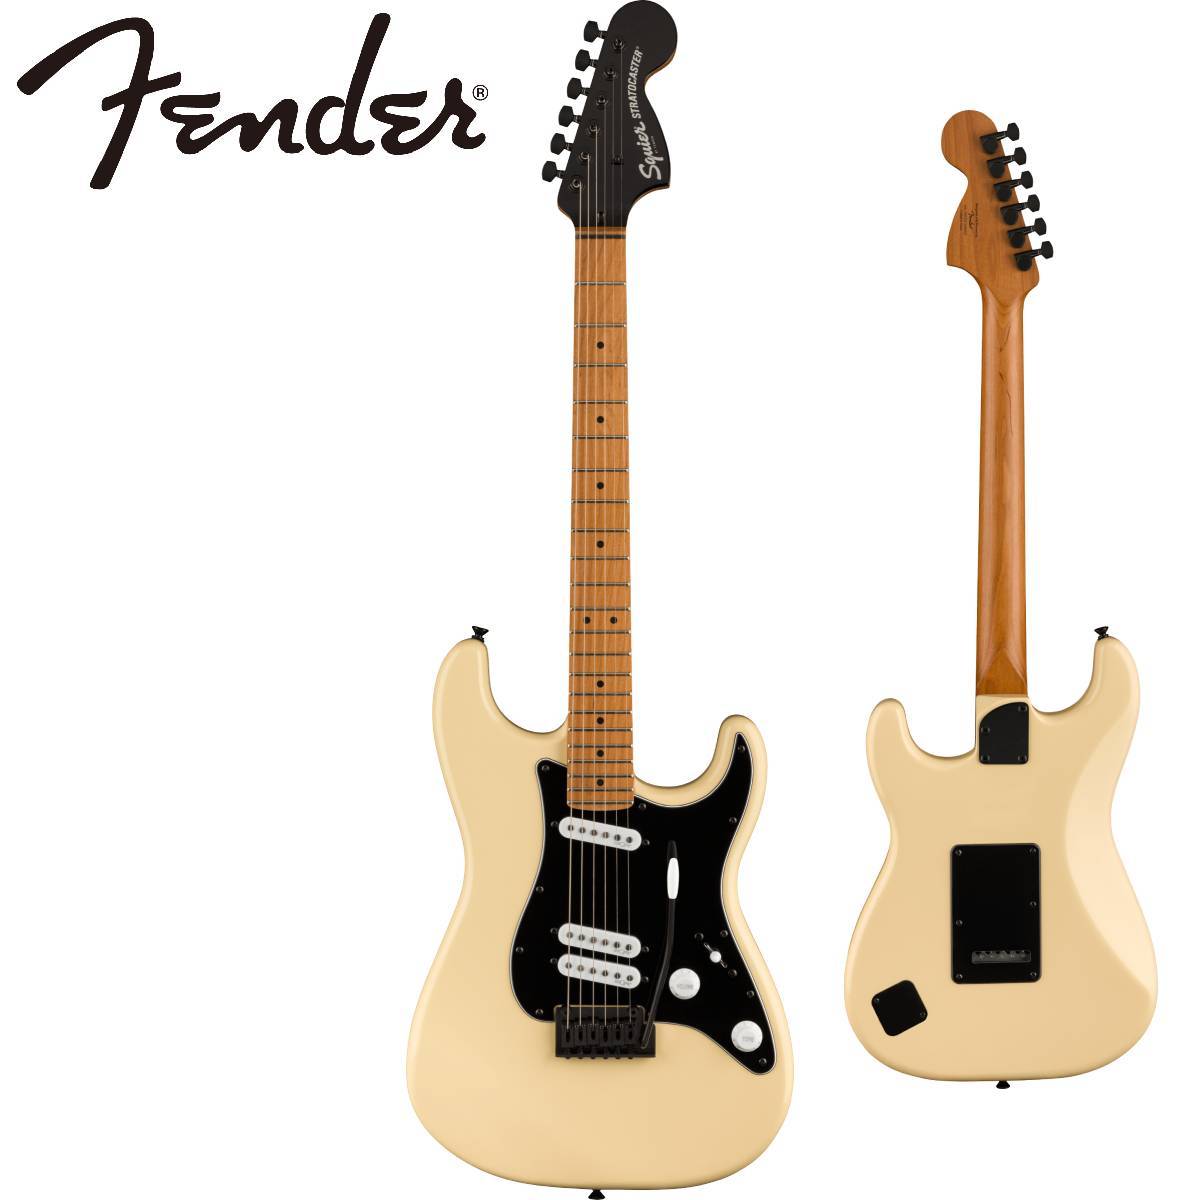 Squier Stratocaster by Fender (ケース付き)